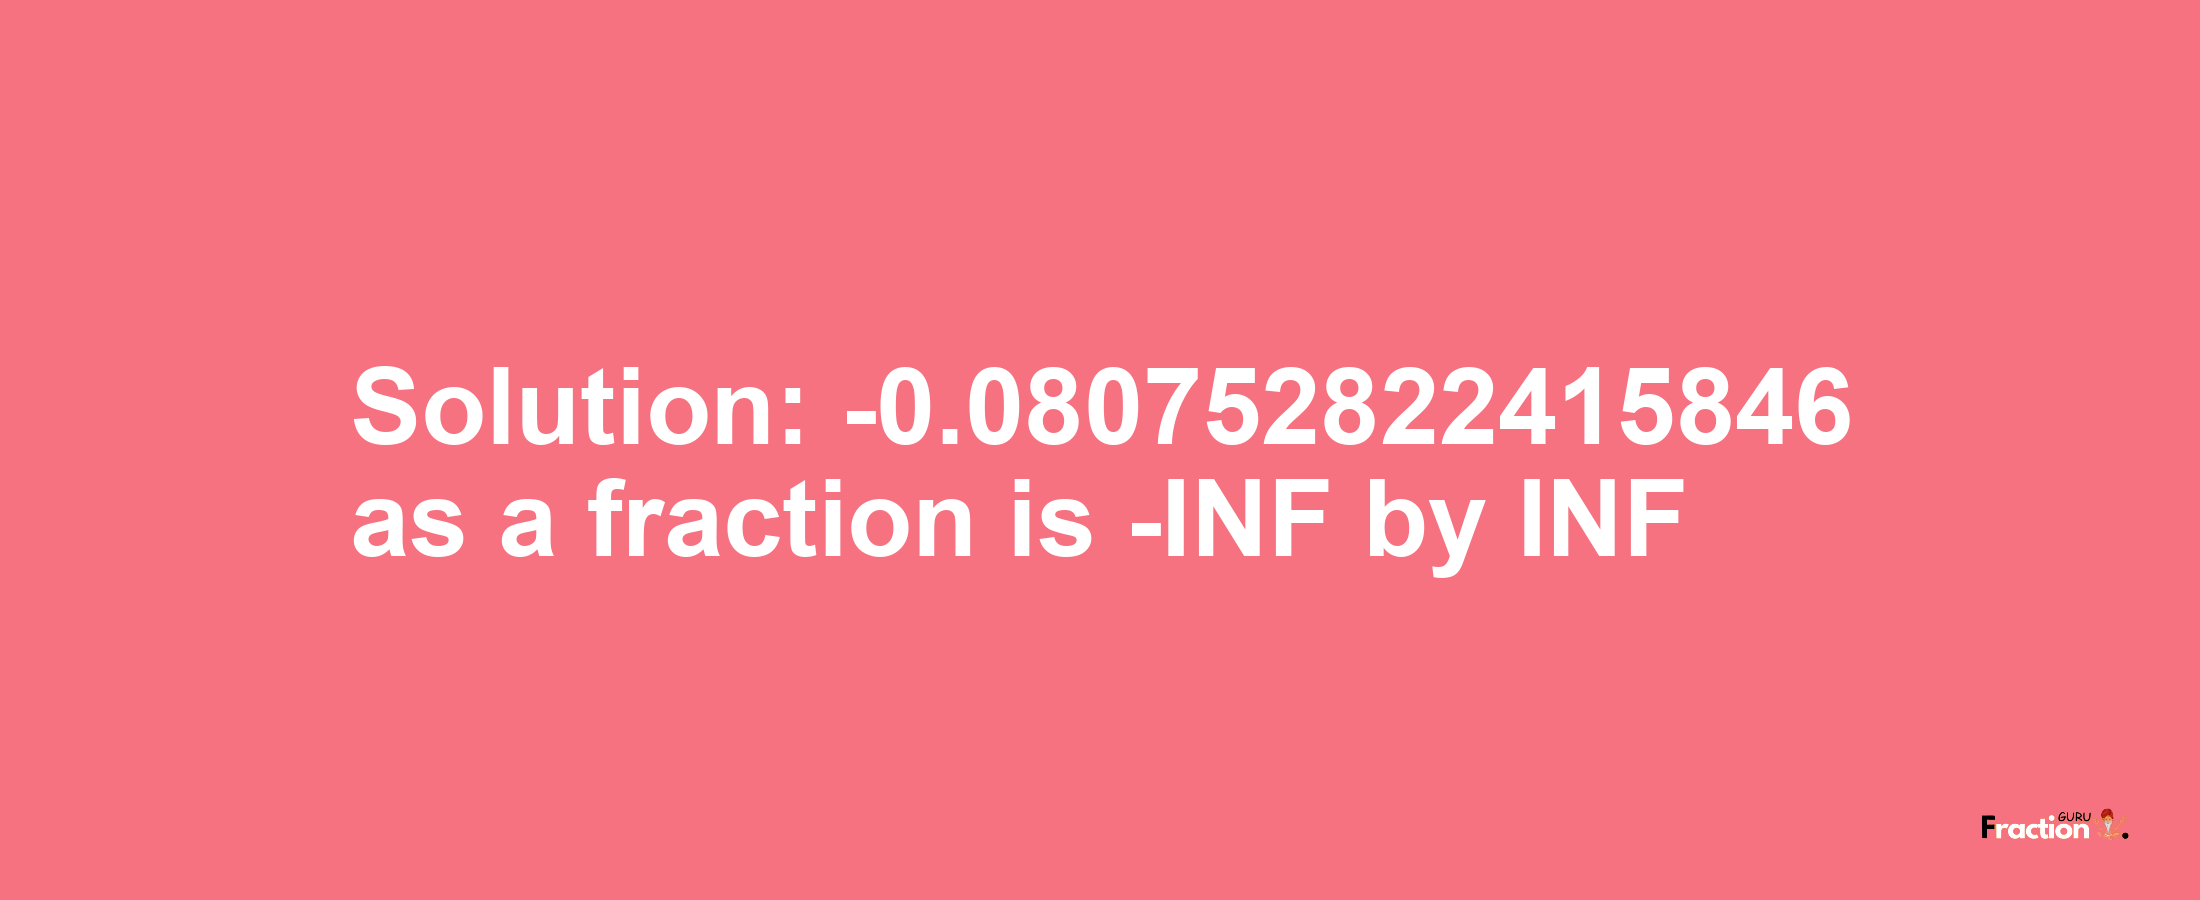 Solution:-0.080752822415846 as a fraction is -INF/INF